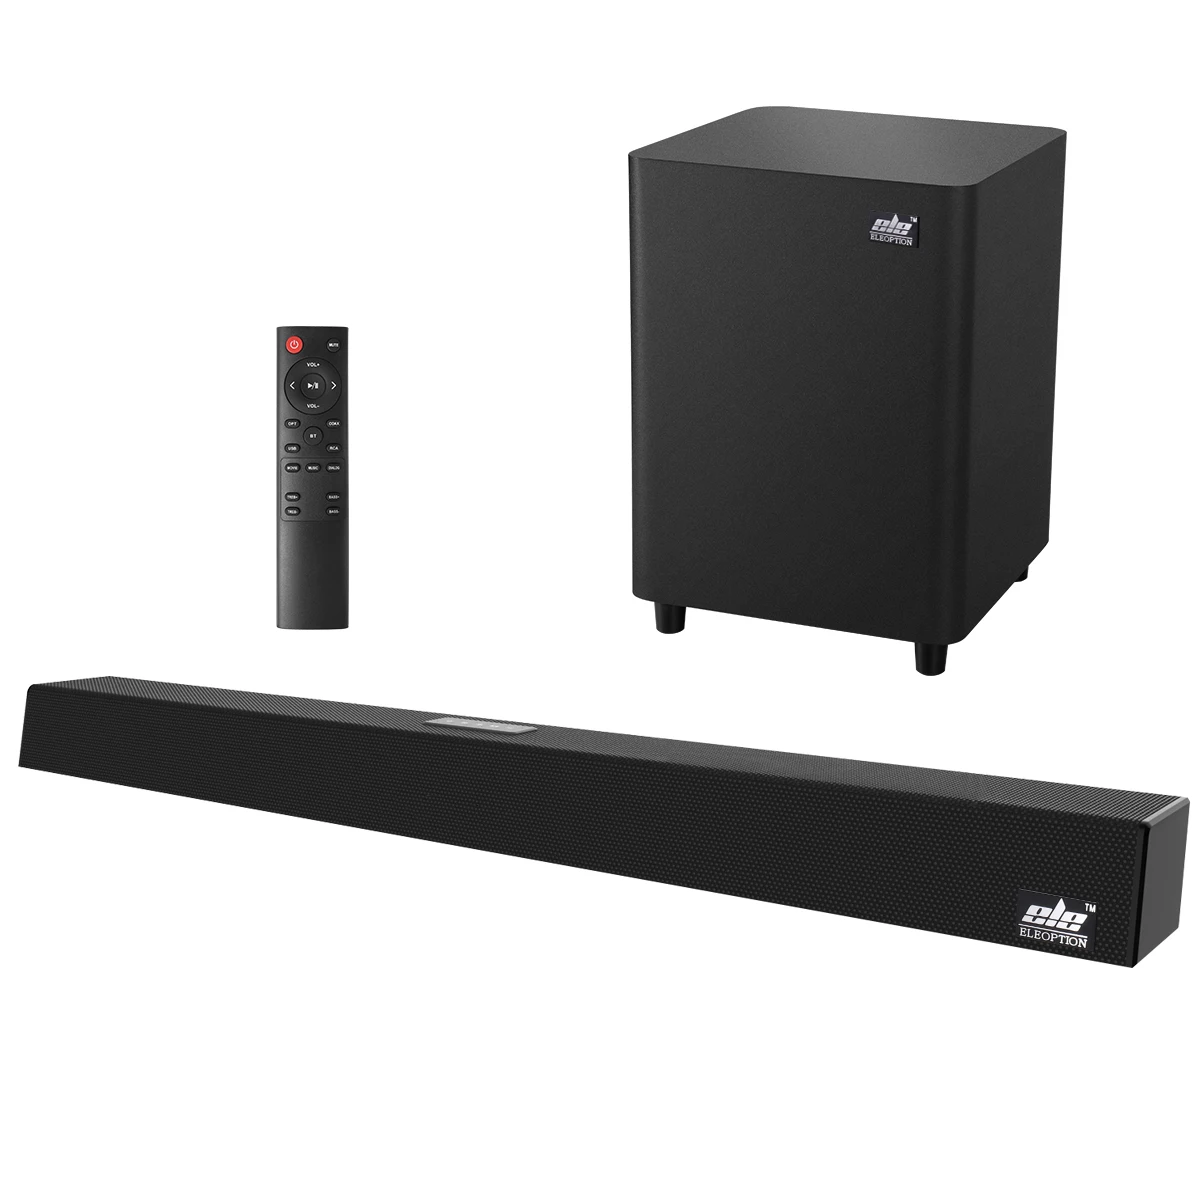 Support Optical Aux Coaxial Speakers For Tv